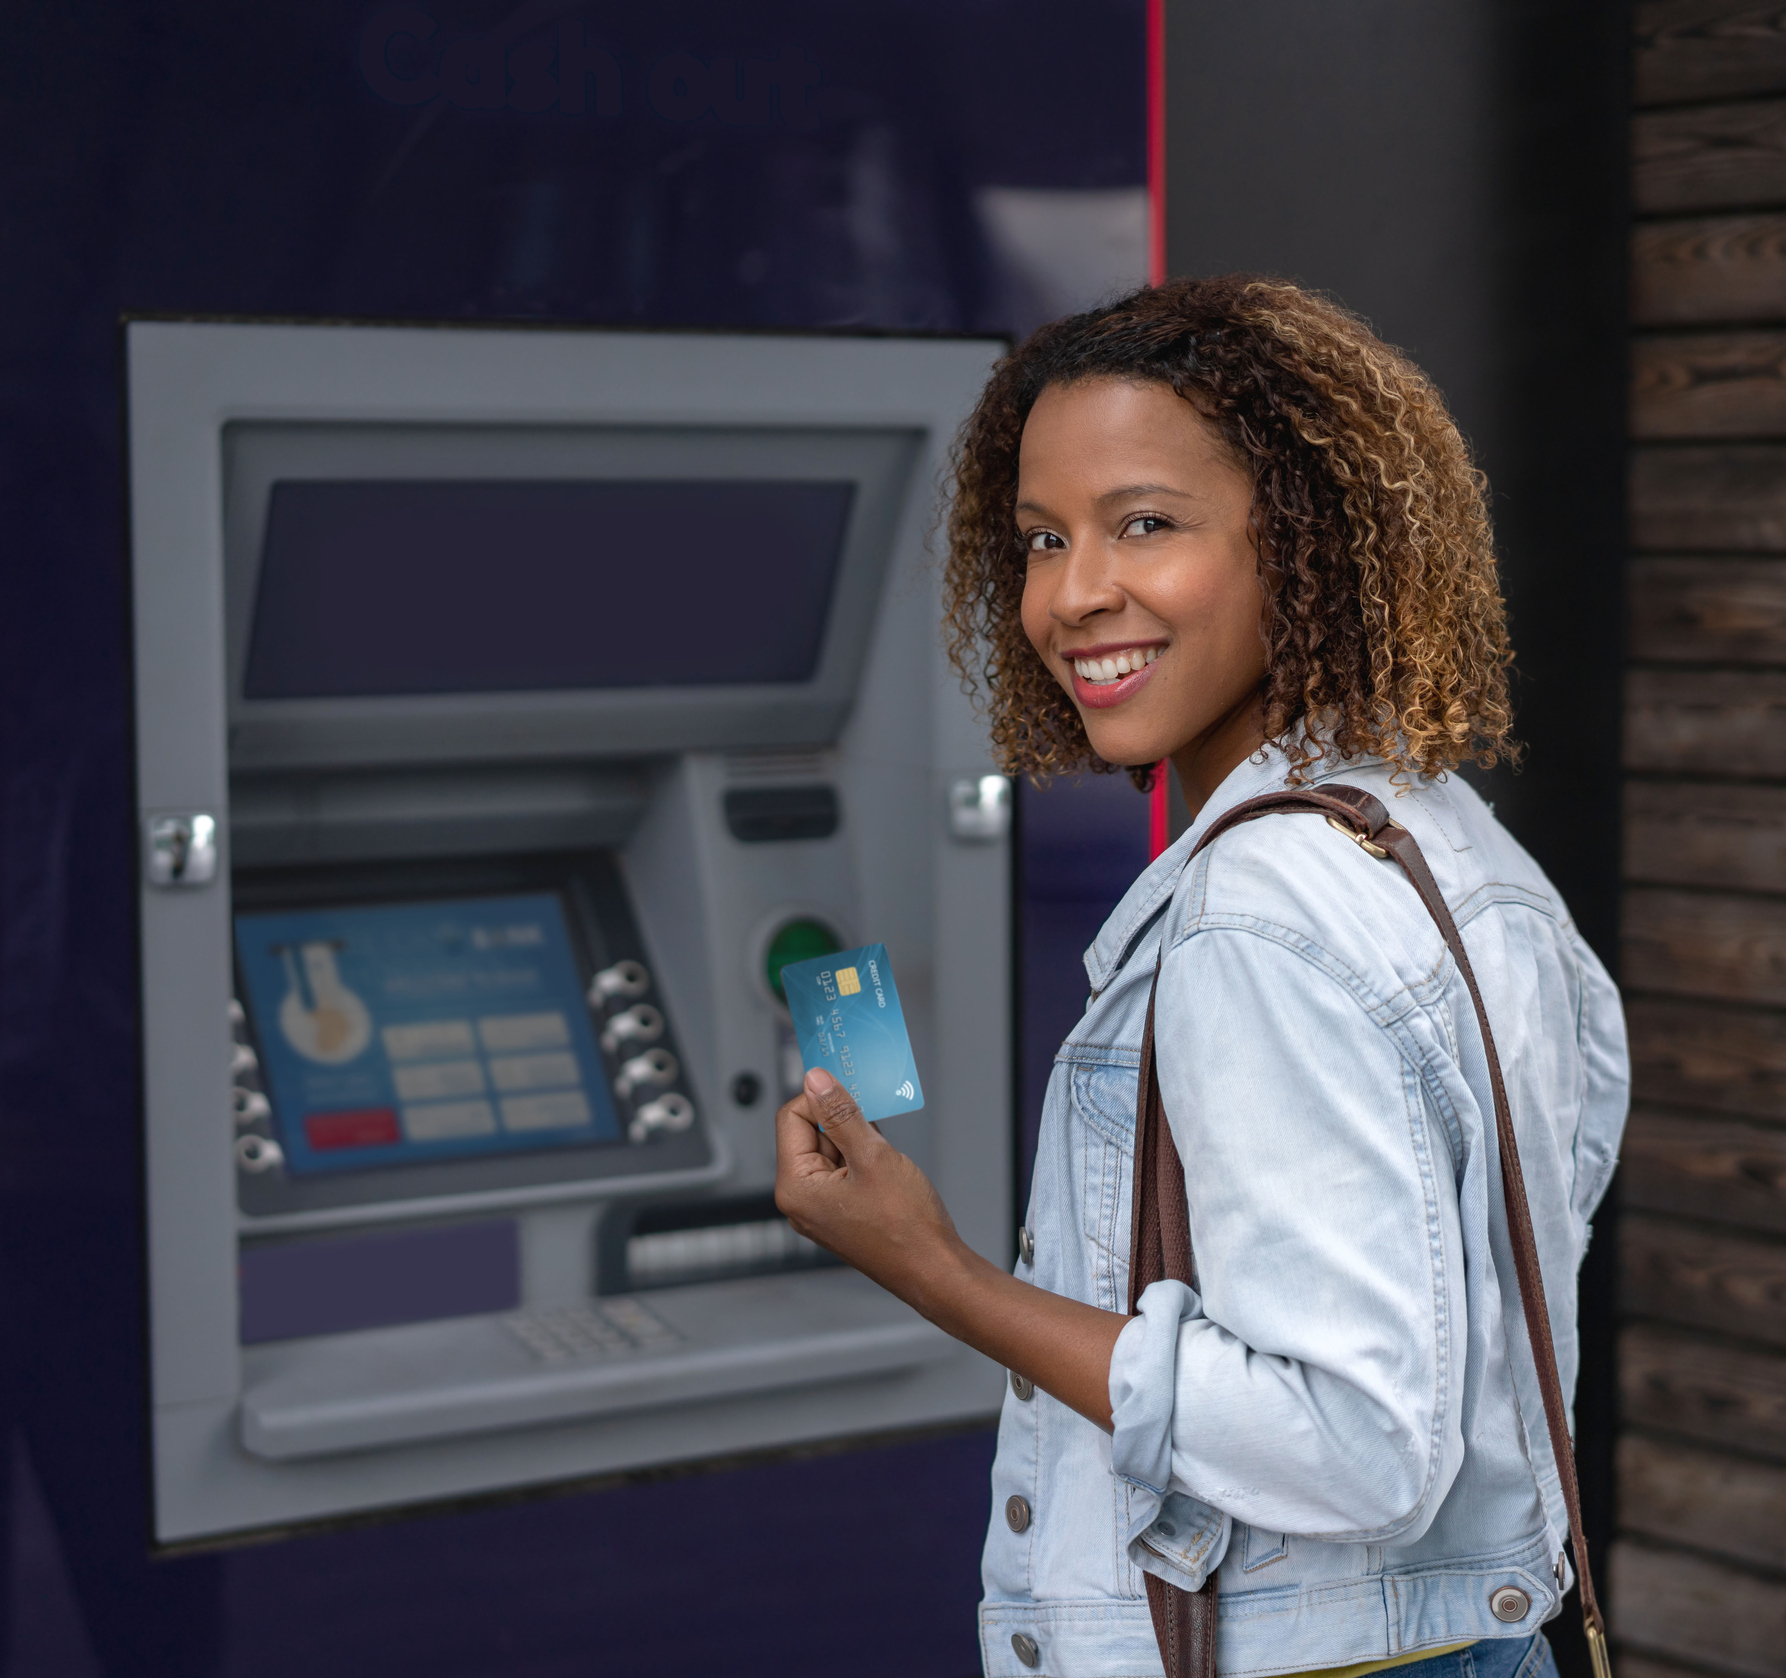 Woman withdrawing money from an ATM